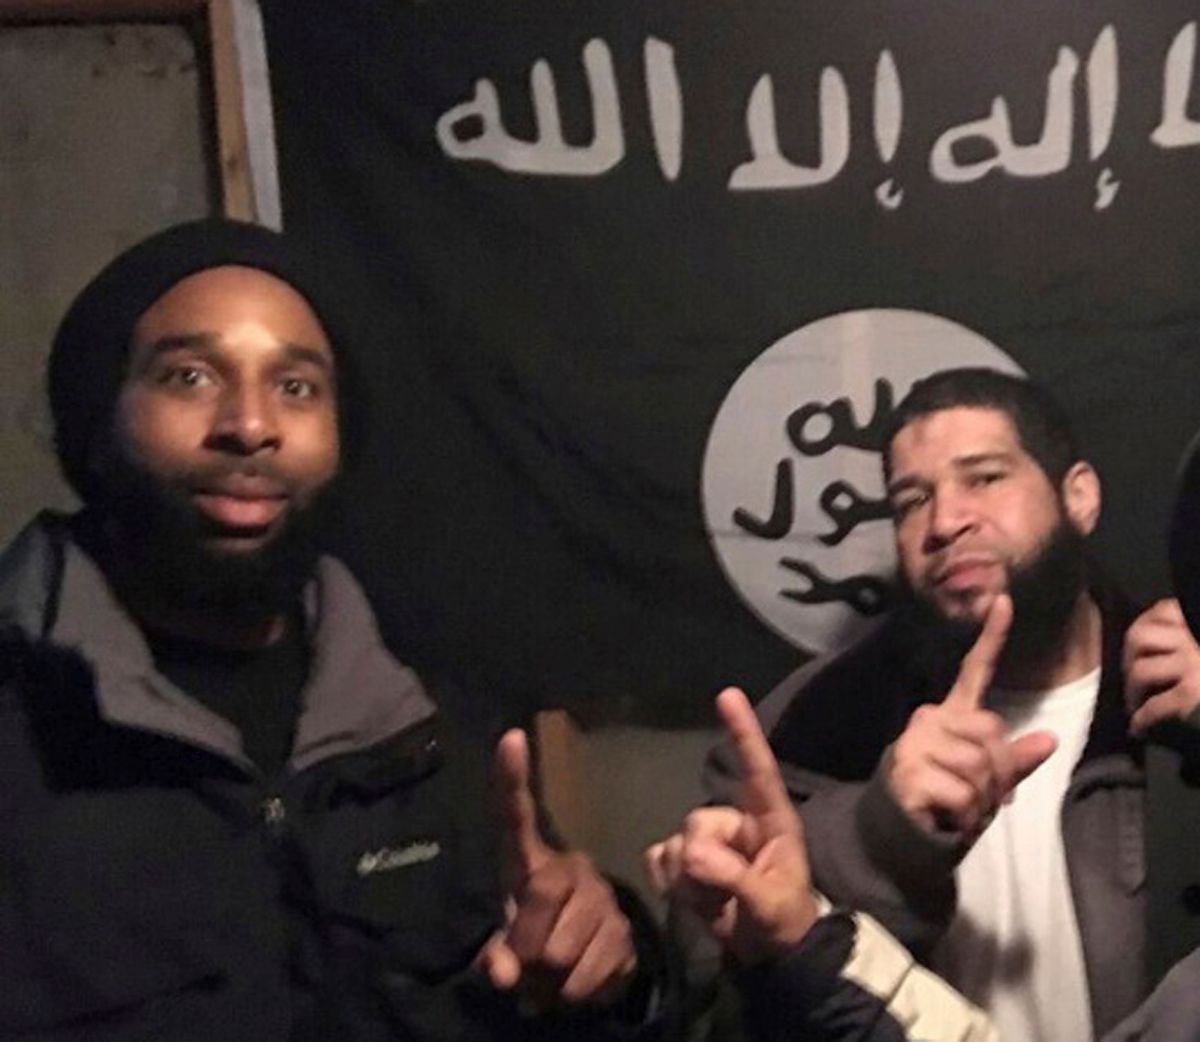 In this undated photo provided by the Federal Bureau of Investigation Joseph D. Jones, left, and Edward Schimenti pose in front of an Islamic State group flag. Jones and Schimenti were arrested by FBI agents on Wednesday, April 12, 2017 on terrorist charges for allegedly conspiring to support the Islamic State militant group. (FBI via AP) (AP)